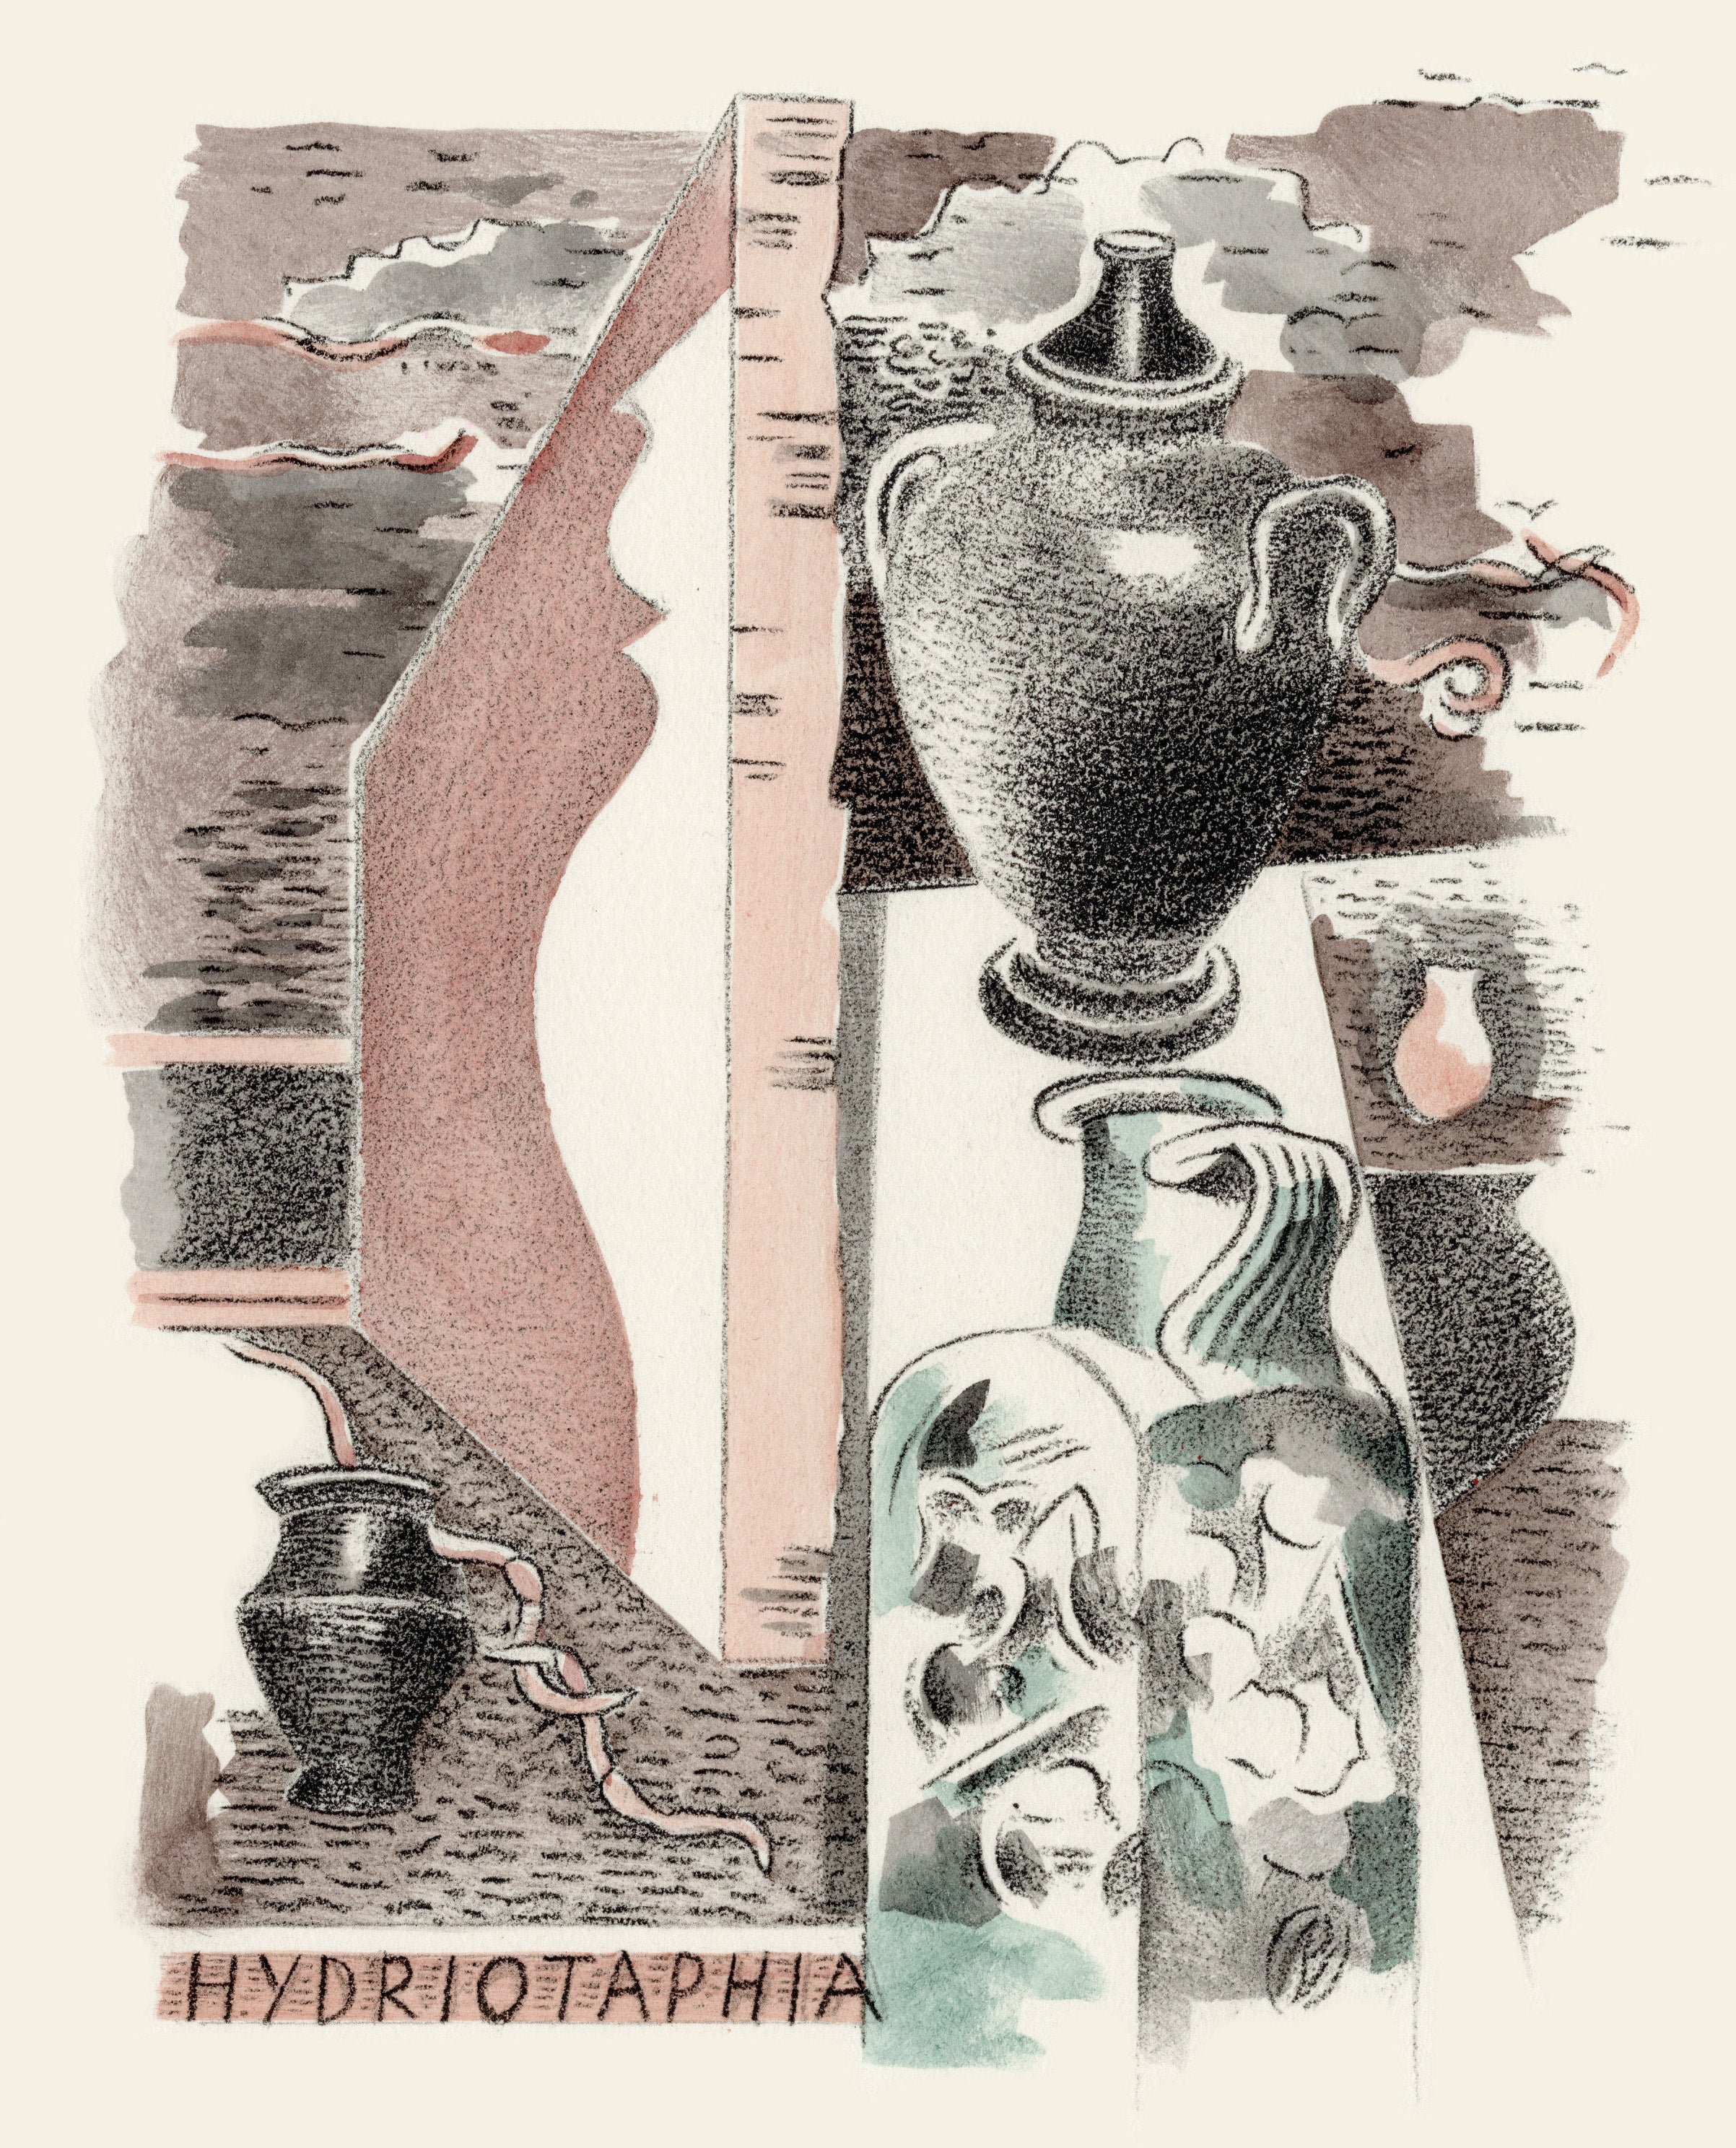 Paul Nash illustrations for Thomas Browne Urne Buriall and The Garden of Cyrus